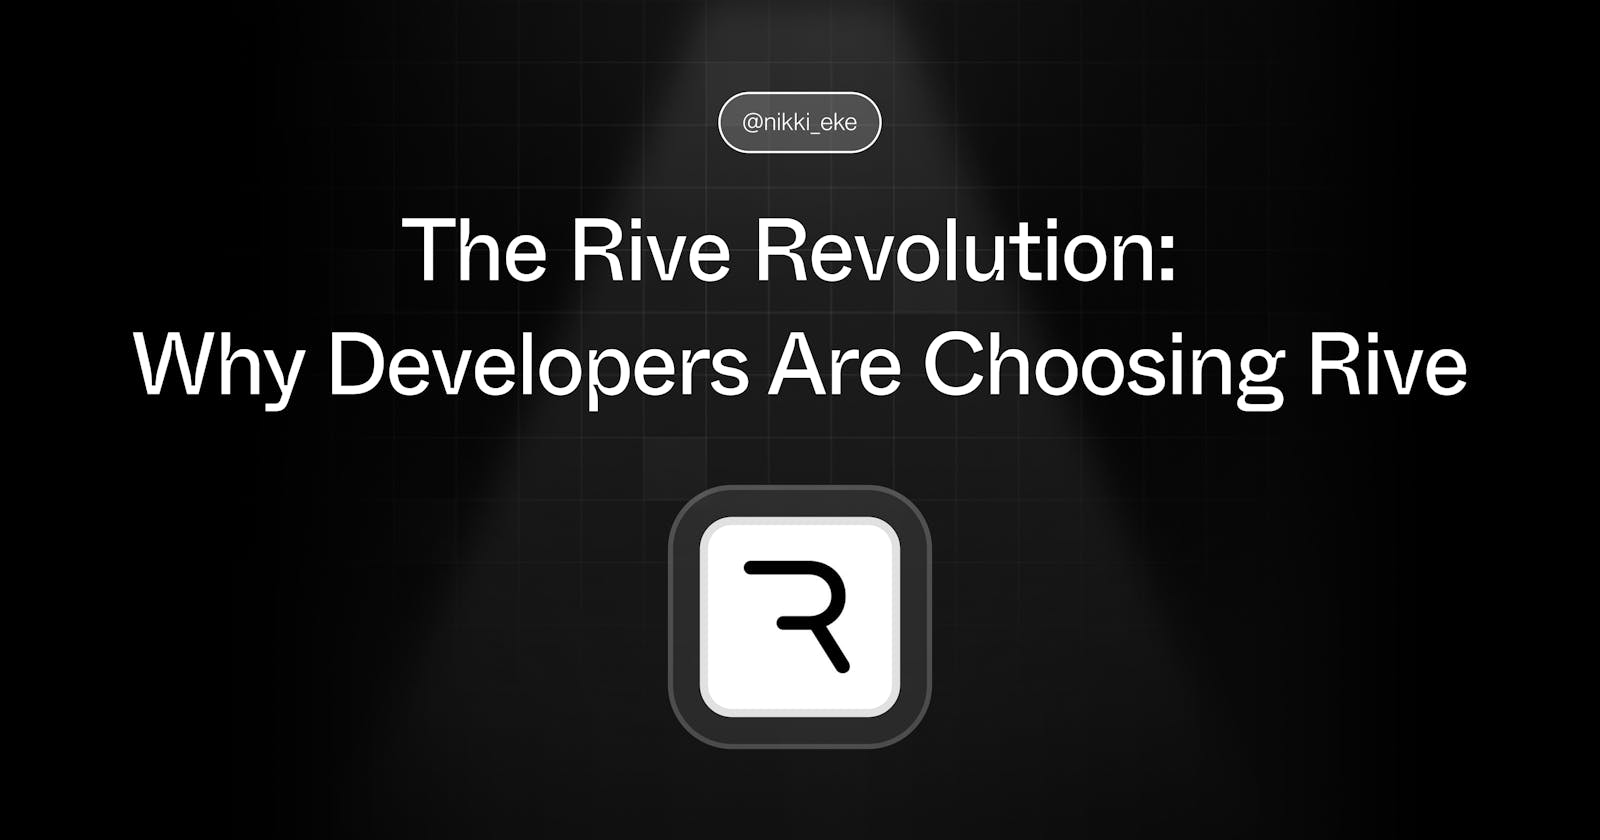 The Rive Revolution: Why Developers Are Choosing Rive